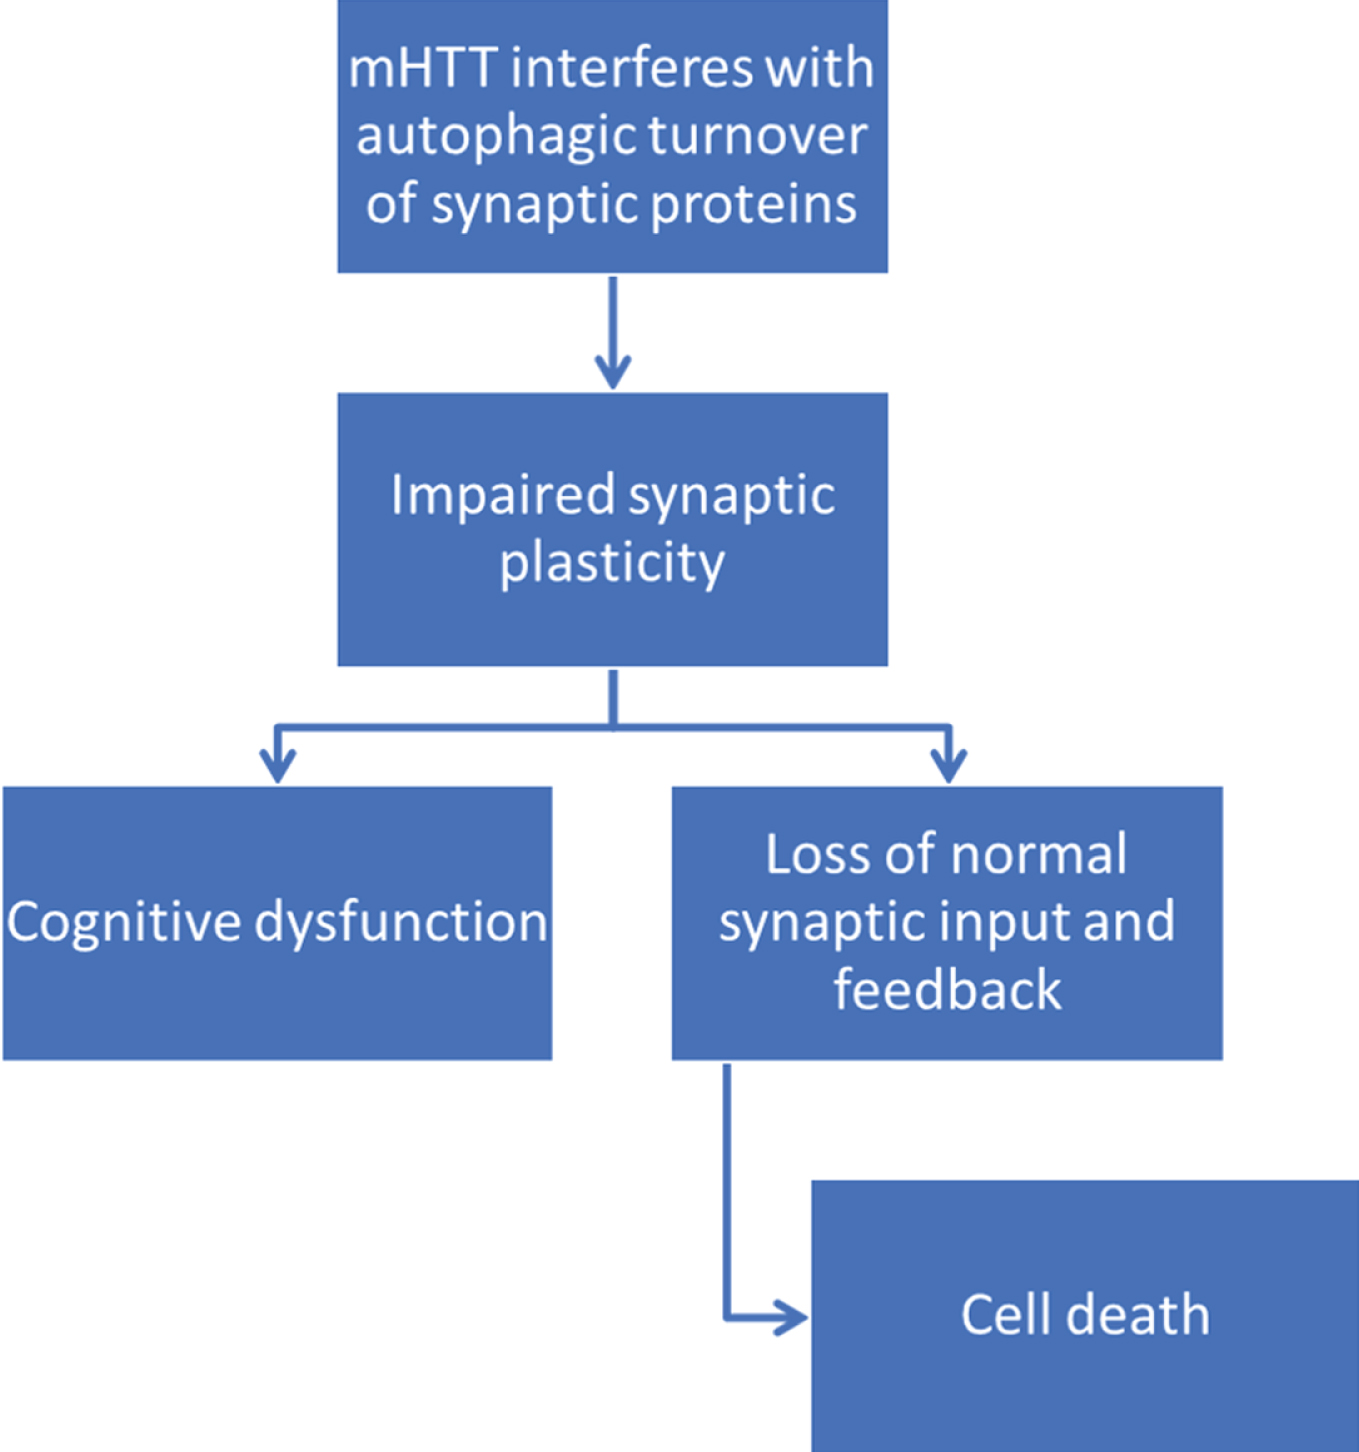 Proposed pathway of mHtt contribution to cognitive dysfunction and cell death through impairments in synaptic autophagy. mHtt interferes with autophagic efficiency [128–131], leading to a decline in synaptic autophagy. This may in turn interfere with synaptic plasticity, causing both cognitive dysfunction and loss of normal synaptic input to post-synaptic cells and feedback to presynaptic cells. Loss of normal synaptic feedback and input may then contribute to cell death.